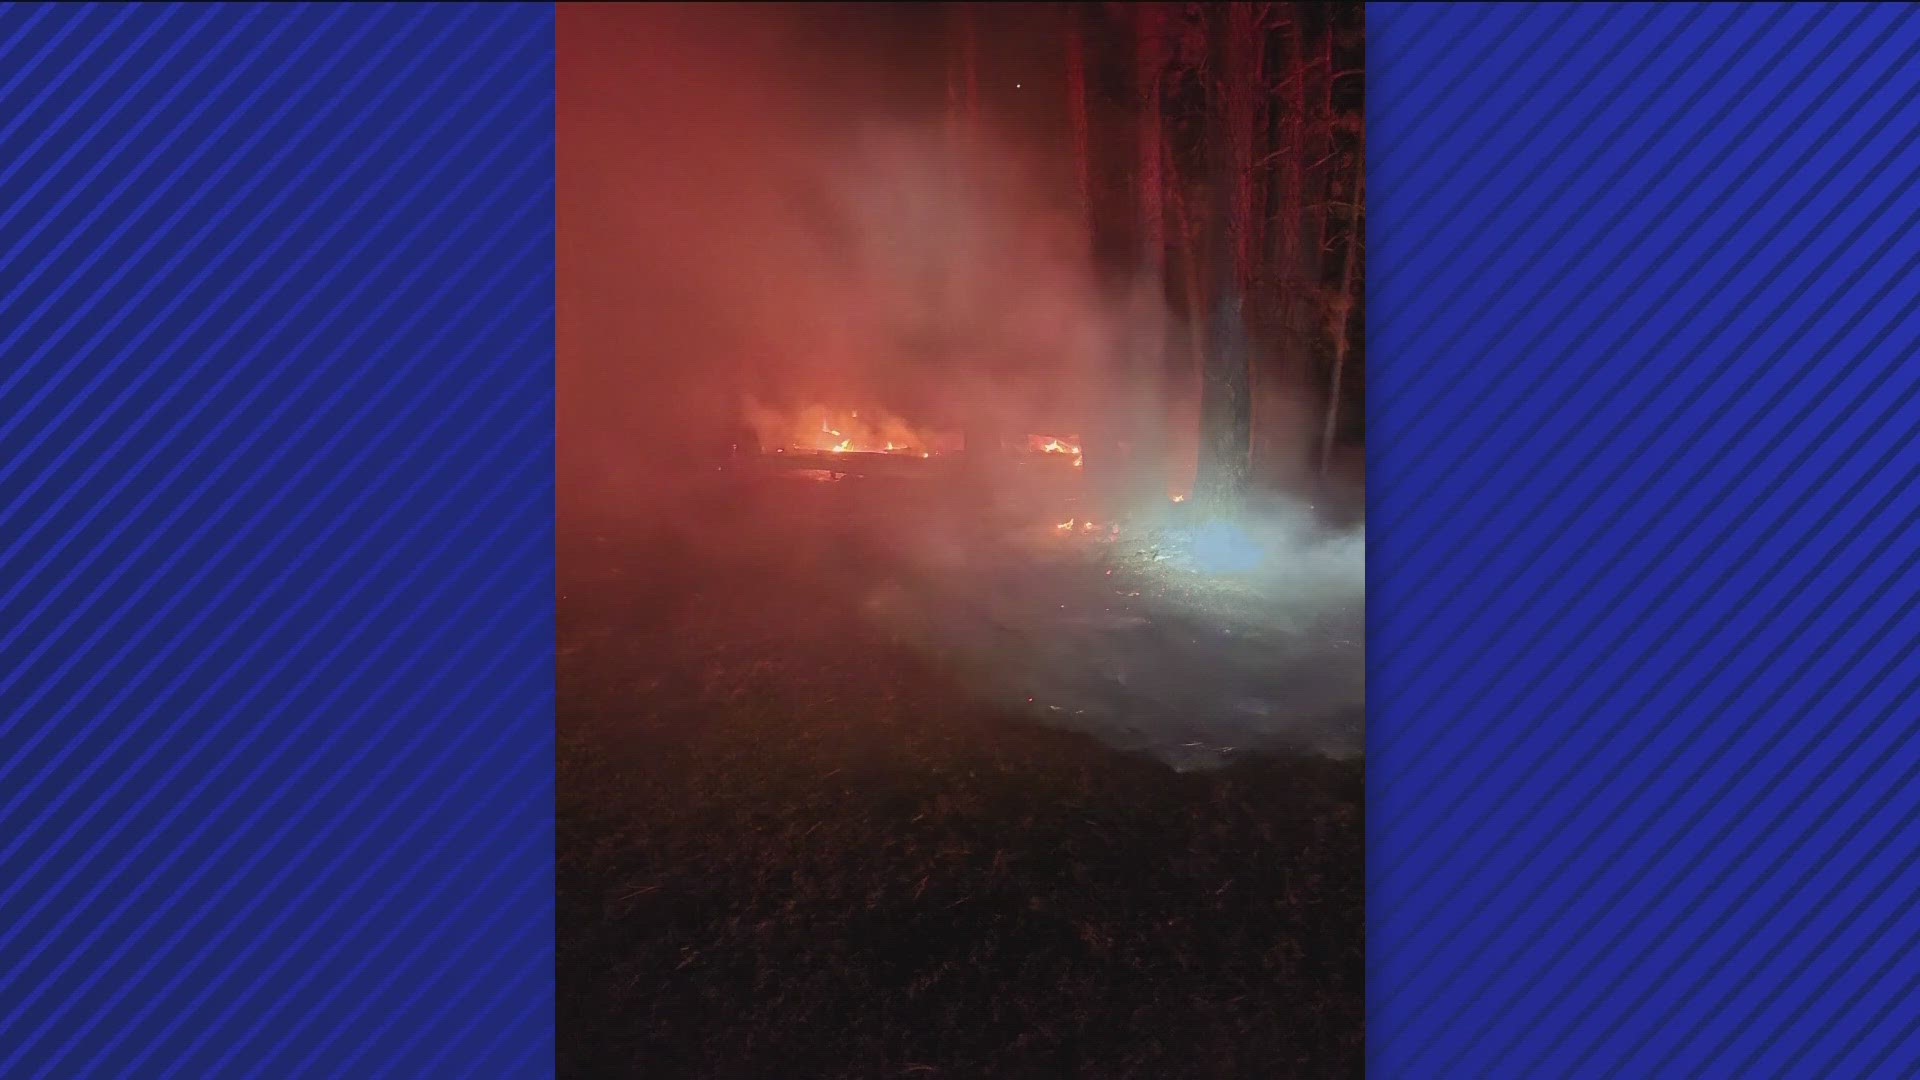 The Cascade Fire Department said it happened near Crown Point, and the fire burned half an acre.